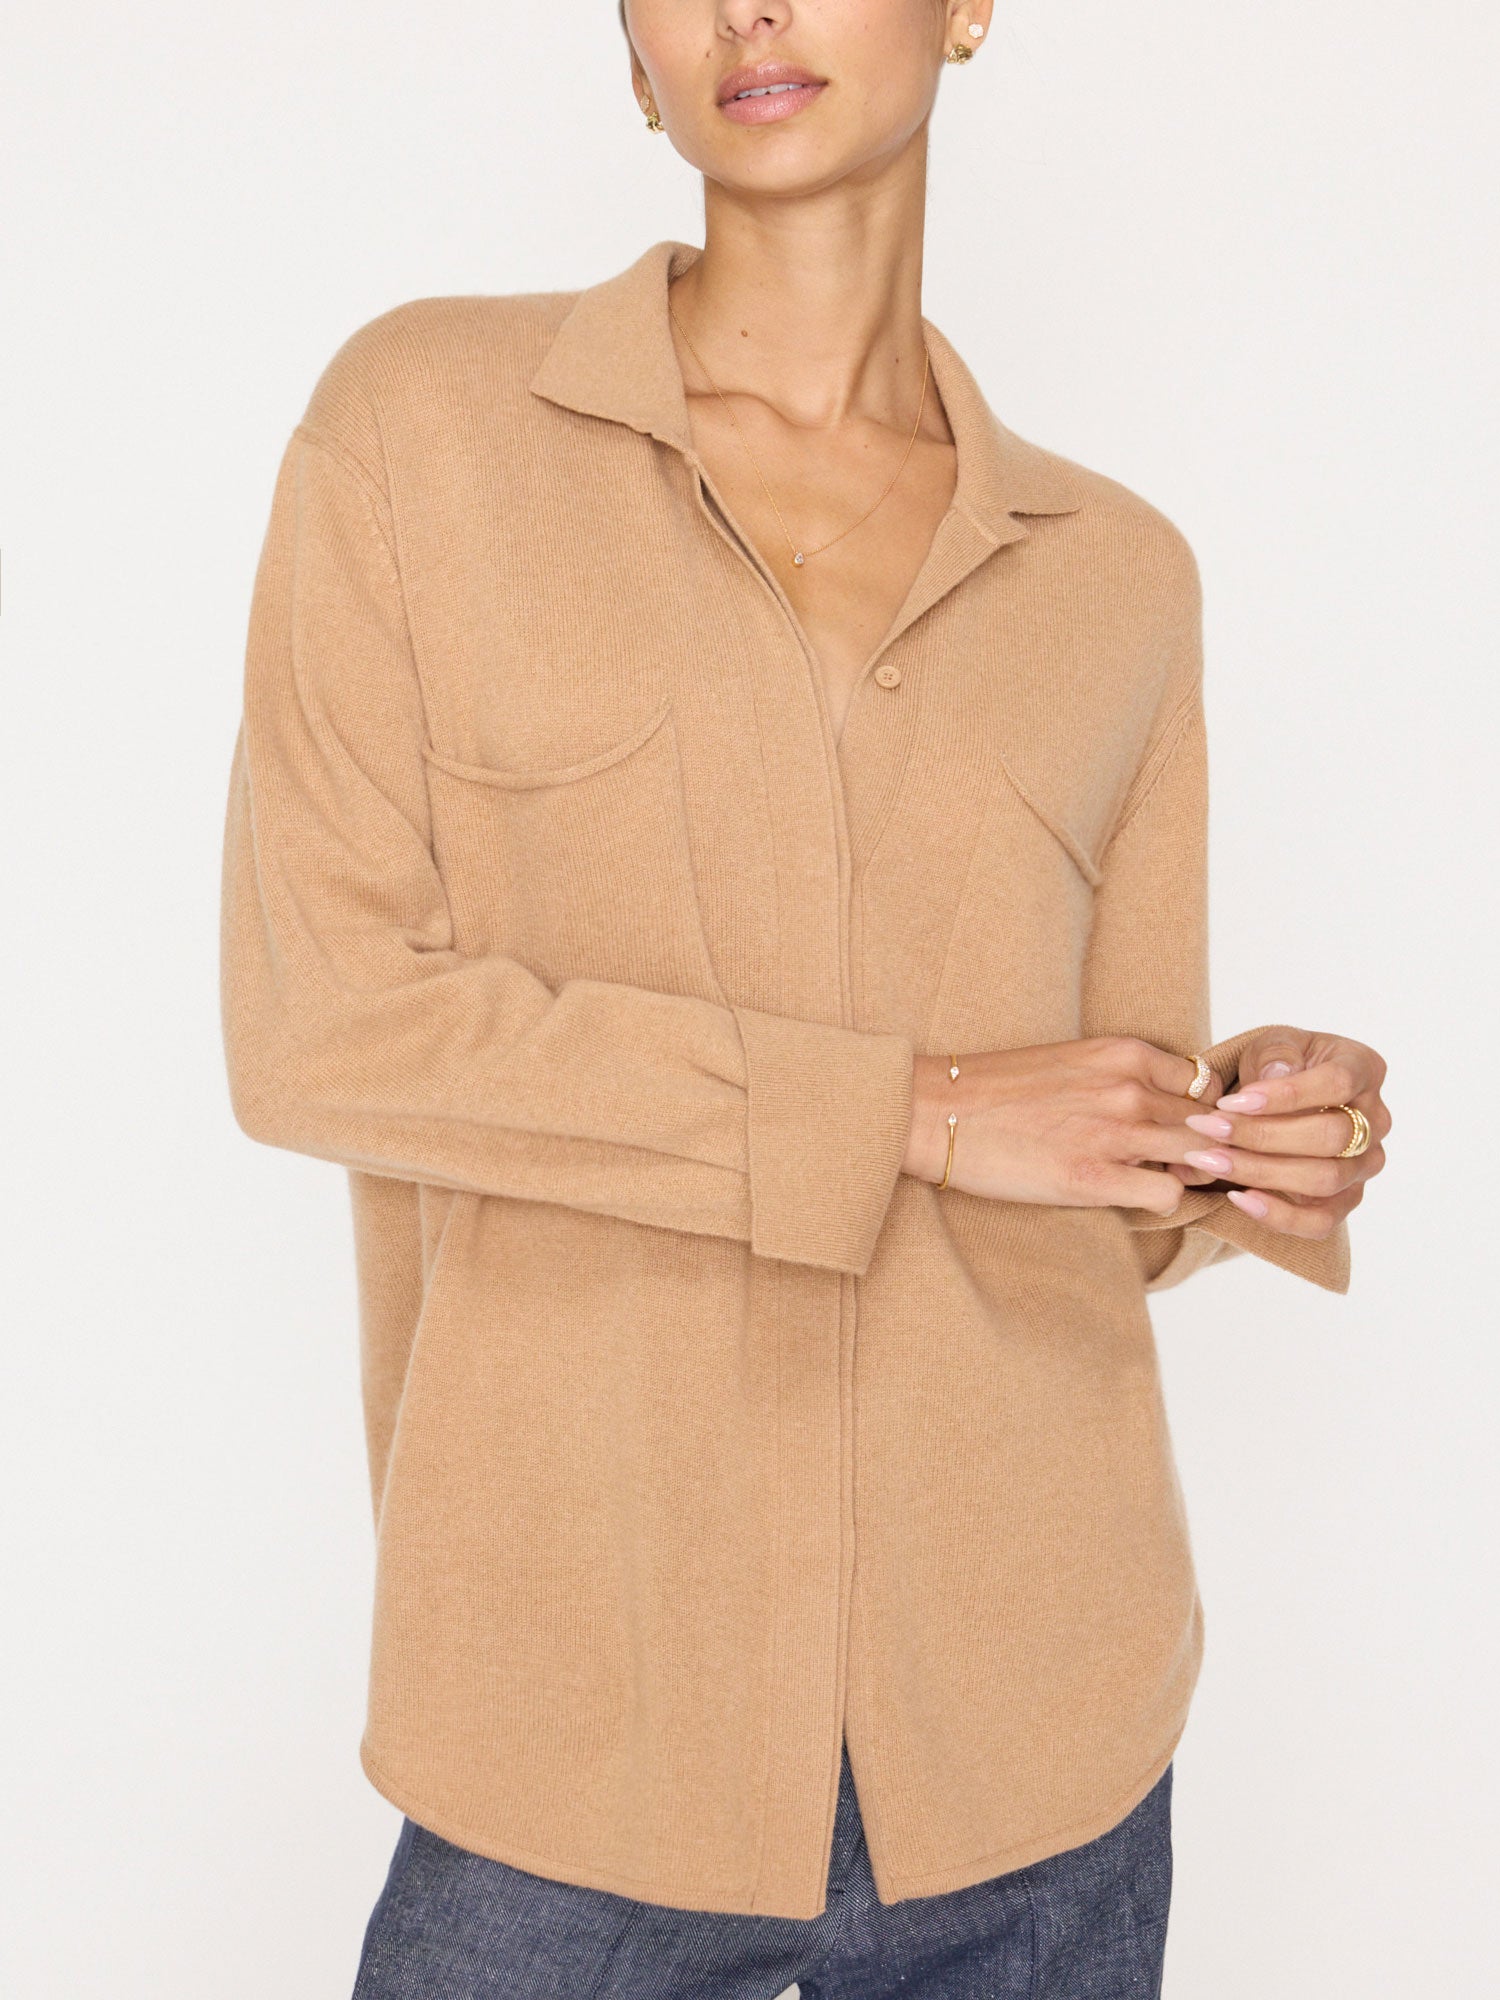 Andre cashmere button down camel shacket front view 2 